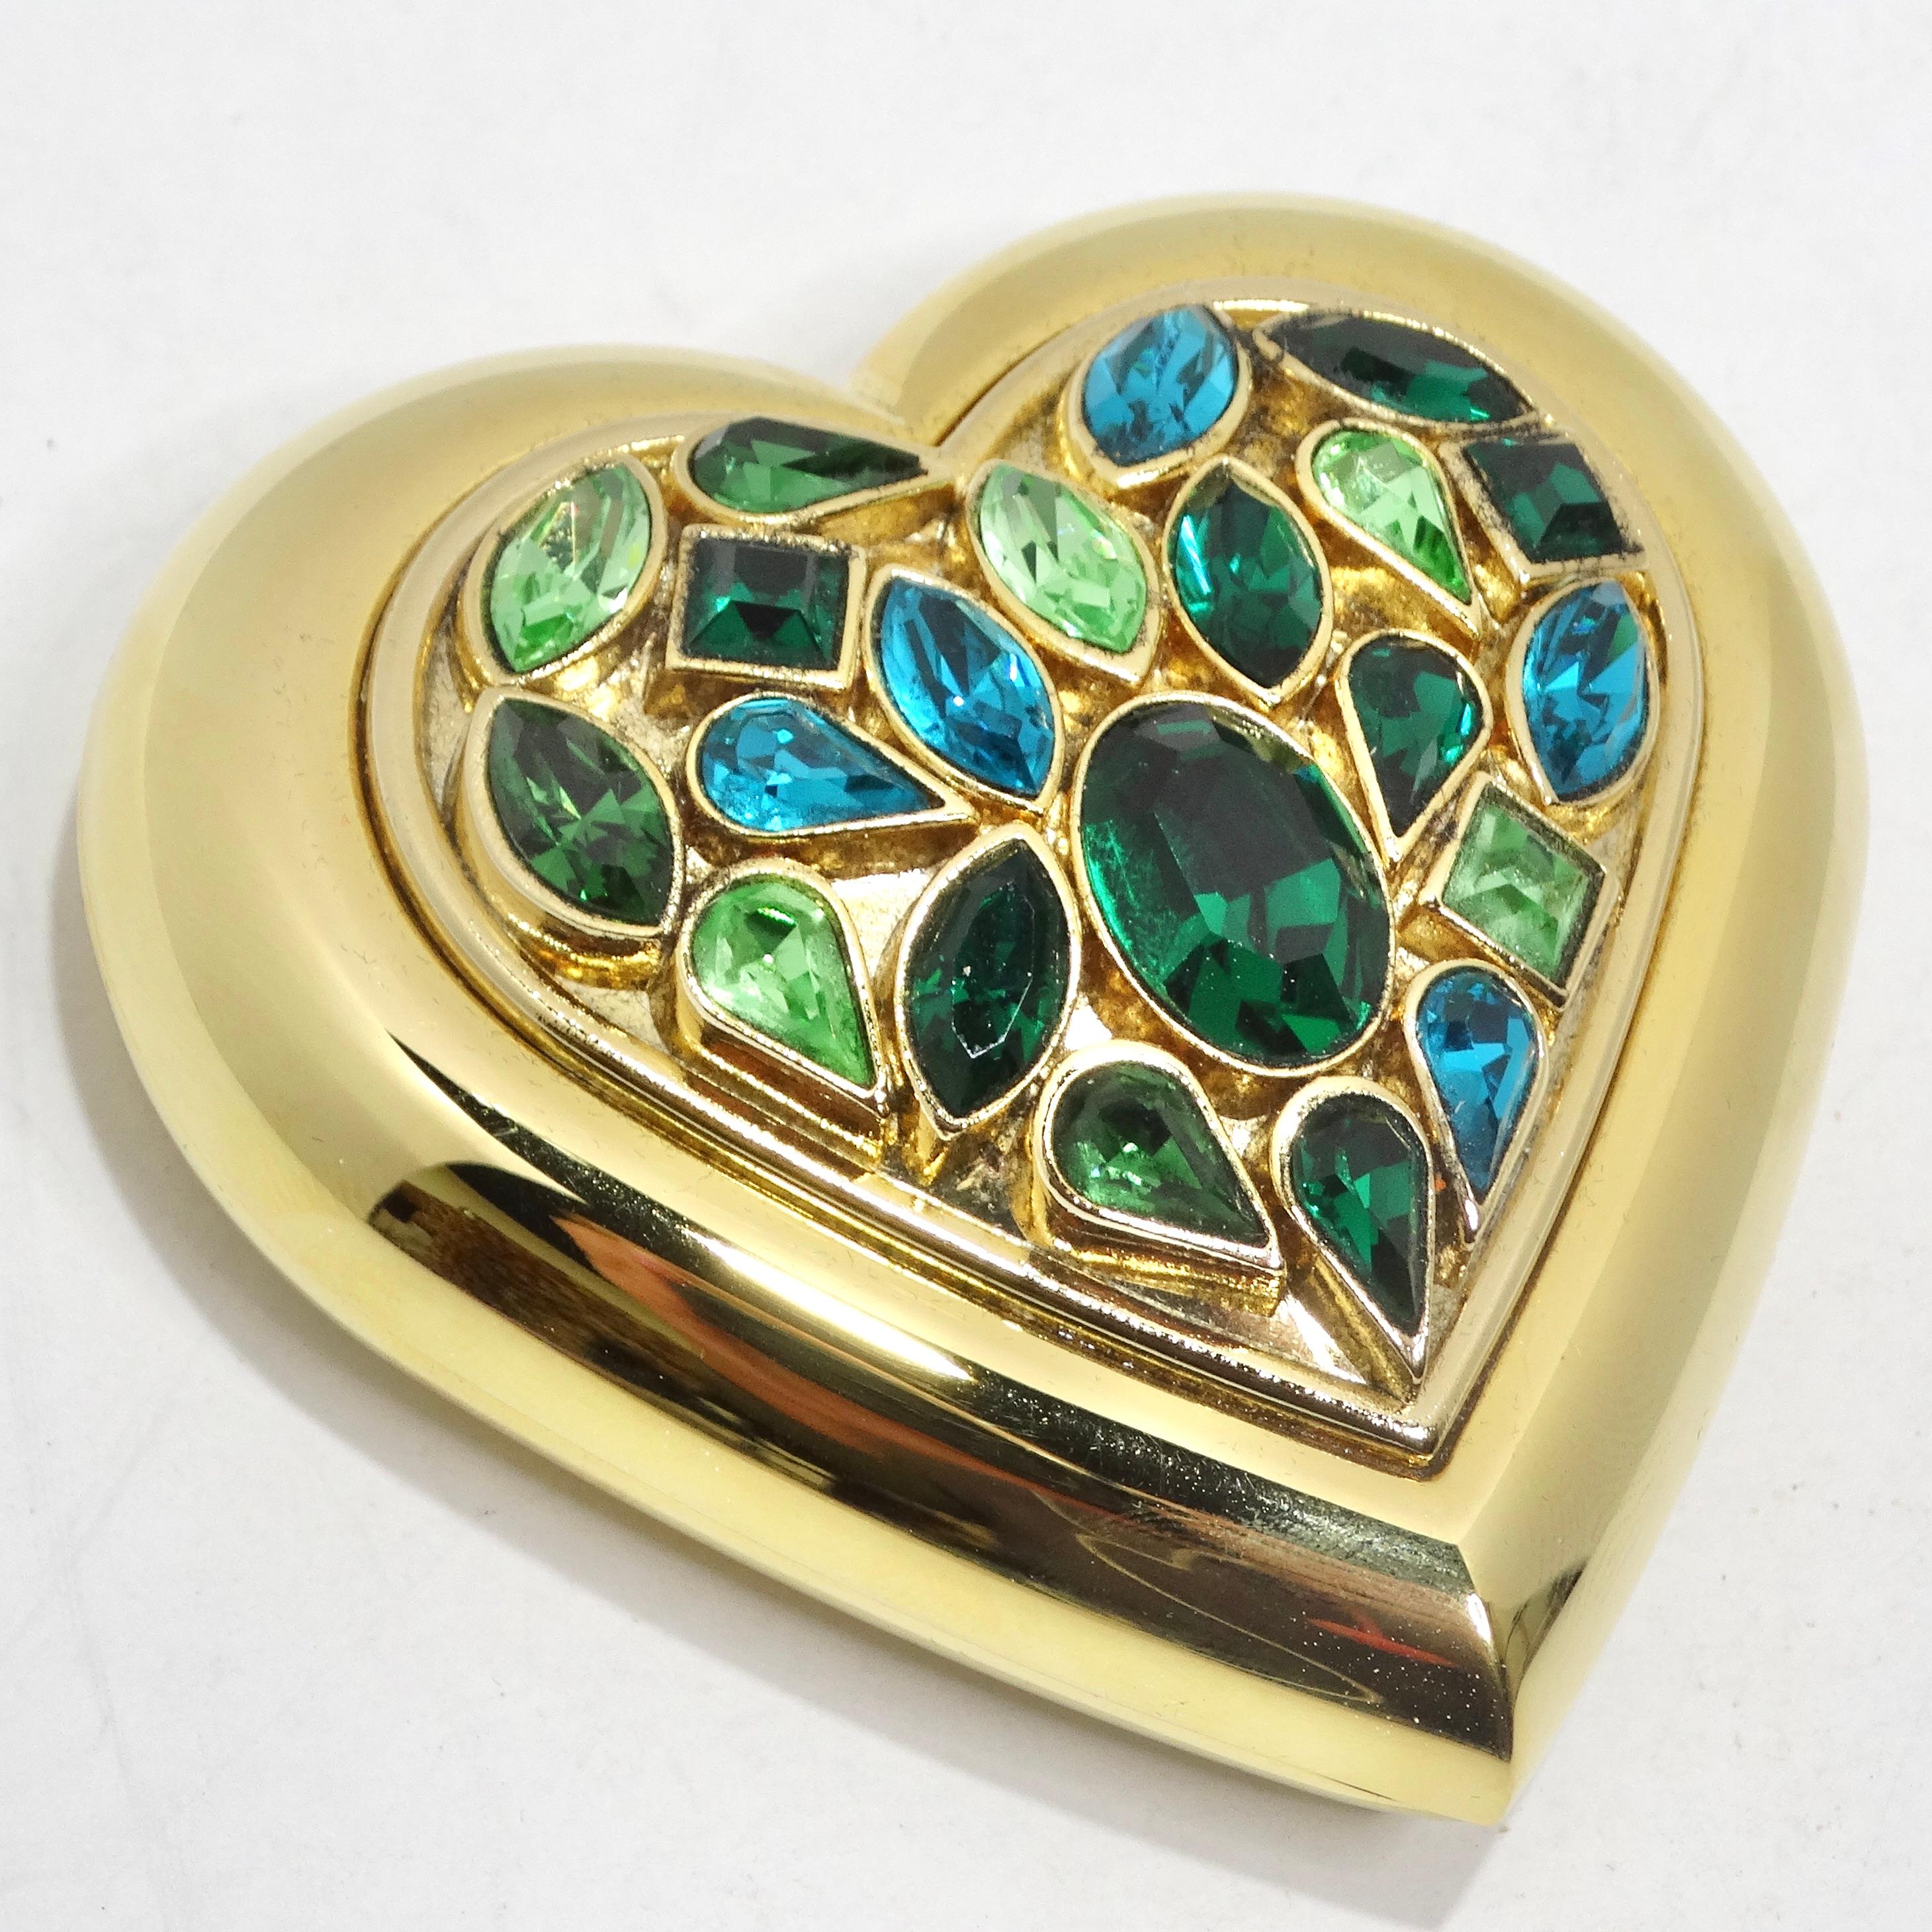 Indulge in vintage elegance with the Yves Saint Laurent 1980s Gem Encrusted Heart Shaped Compact Mirror. This yellow gold plated vanity mirror is designed in the shape of a heart and features a plethora of blue and green gems on the front, elevating